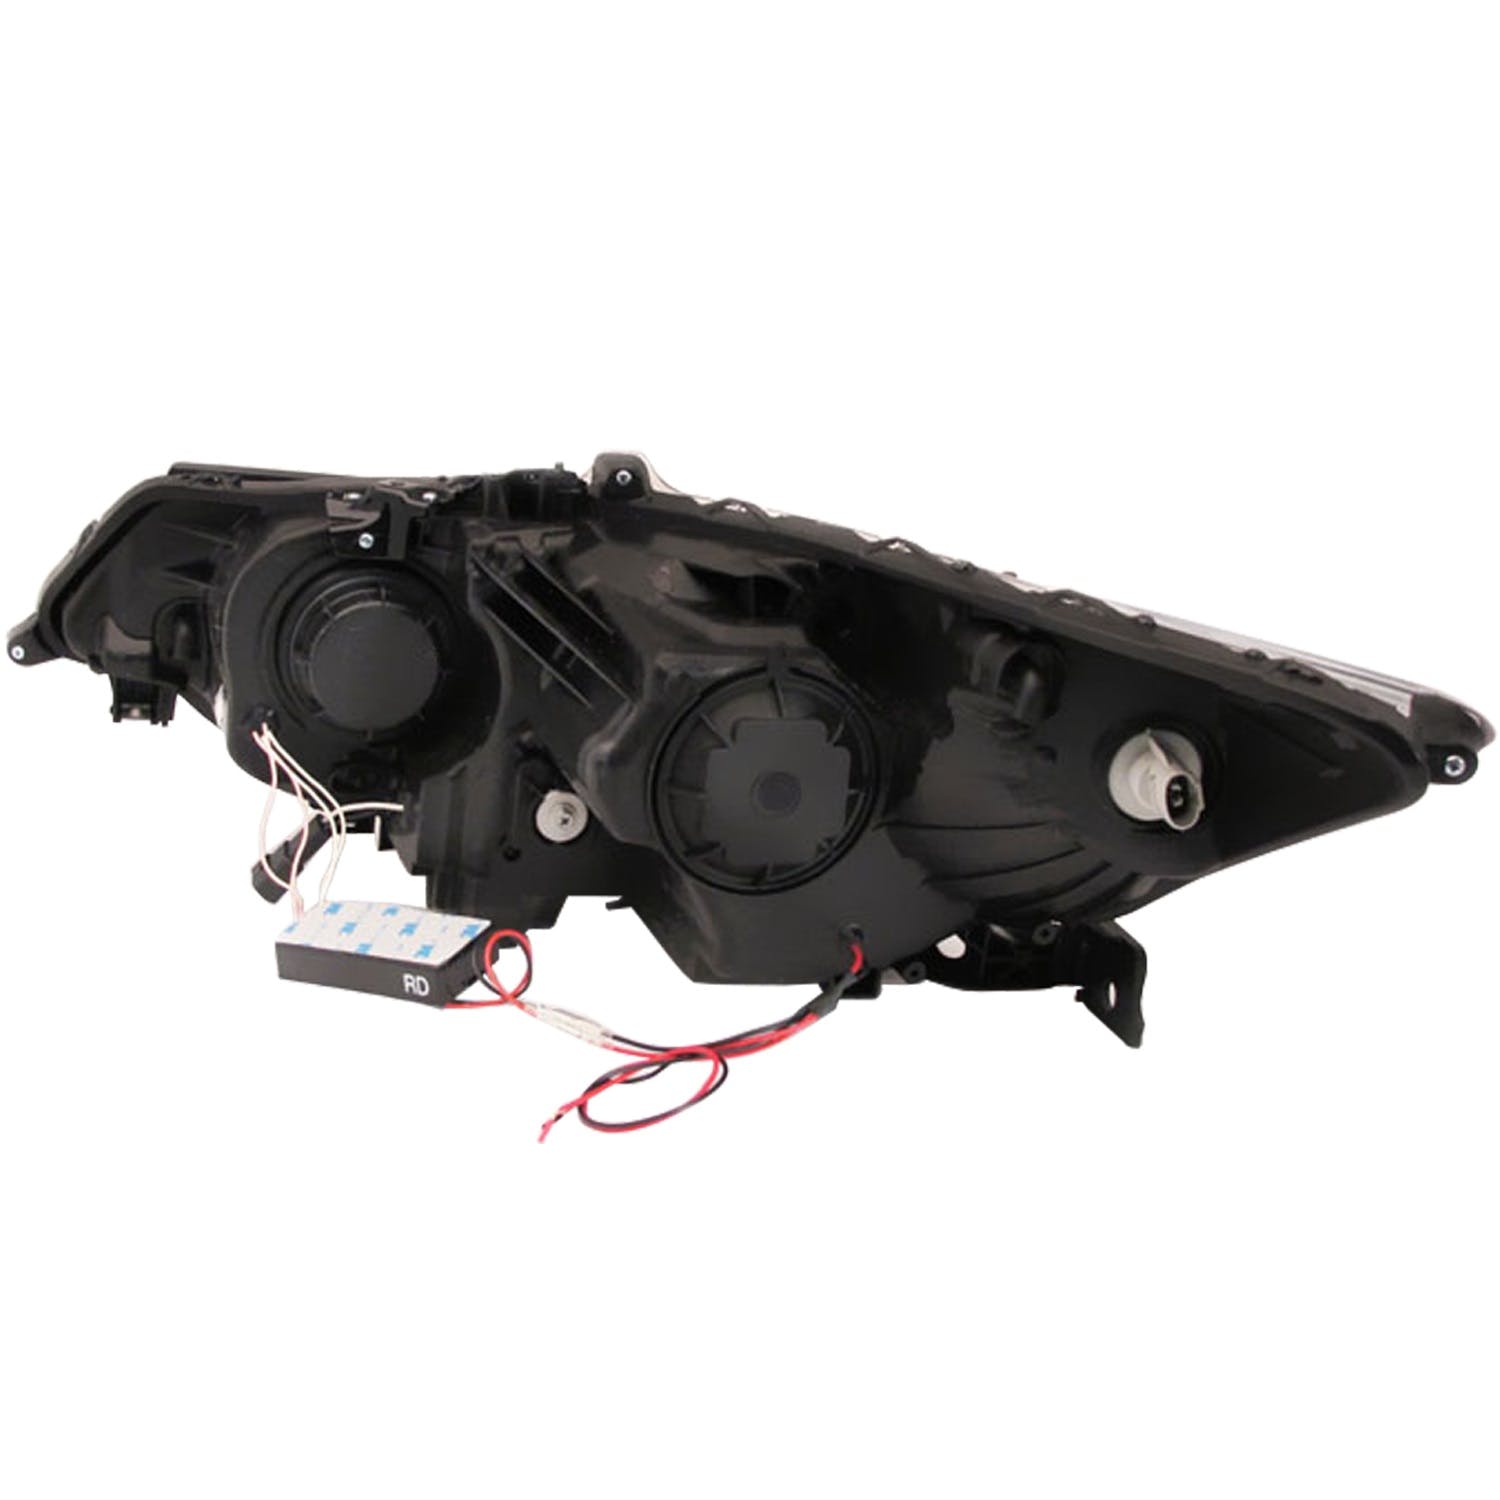 AnzoUSA 121393 Projector Headlights with Halo Black (SMD LED) (HID Compatible)